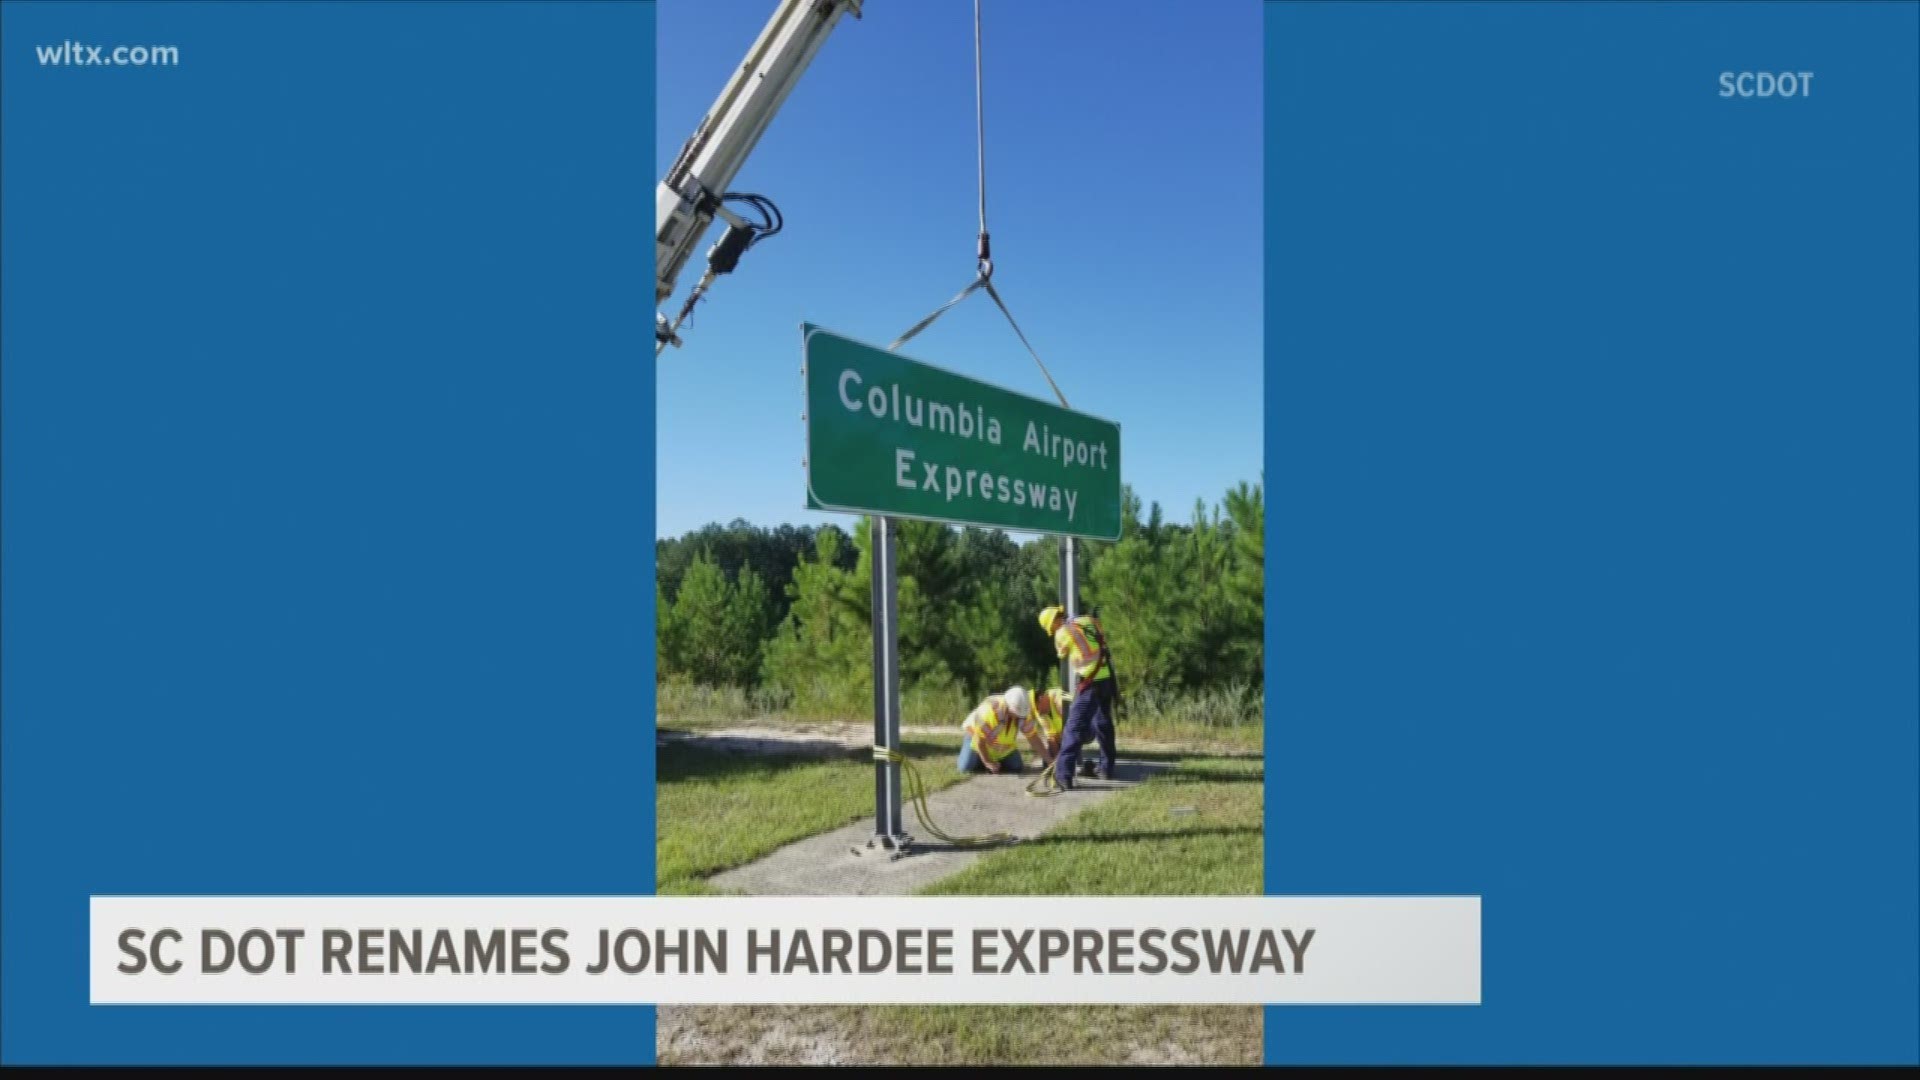 The John Hardee Expressway near the Columbia Metropolitan Airport is no more. This comes after Hardee's arrest on solicitation of prostitution charges.